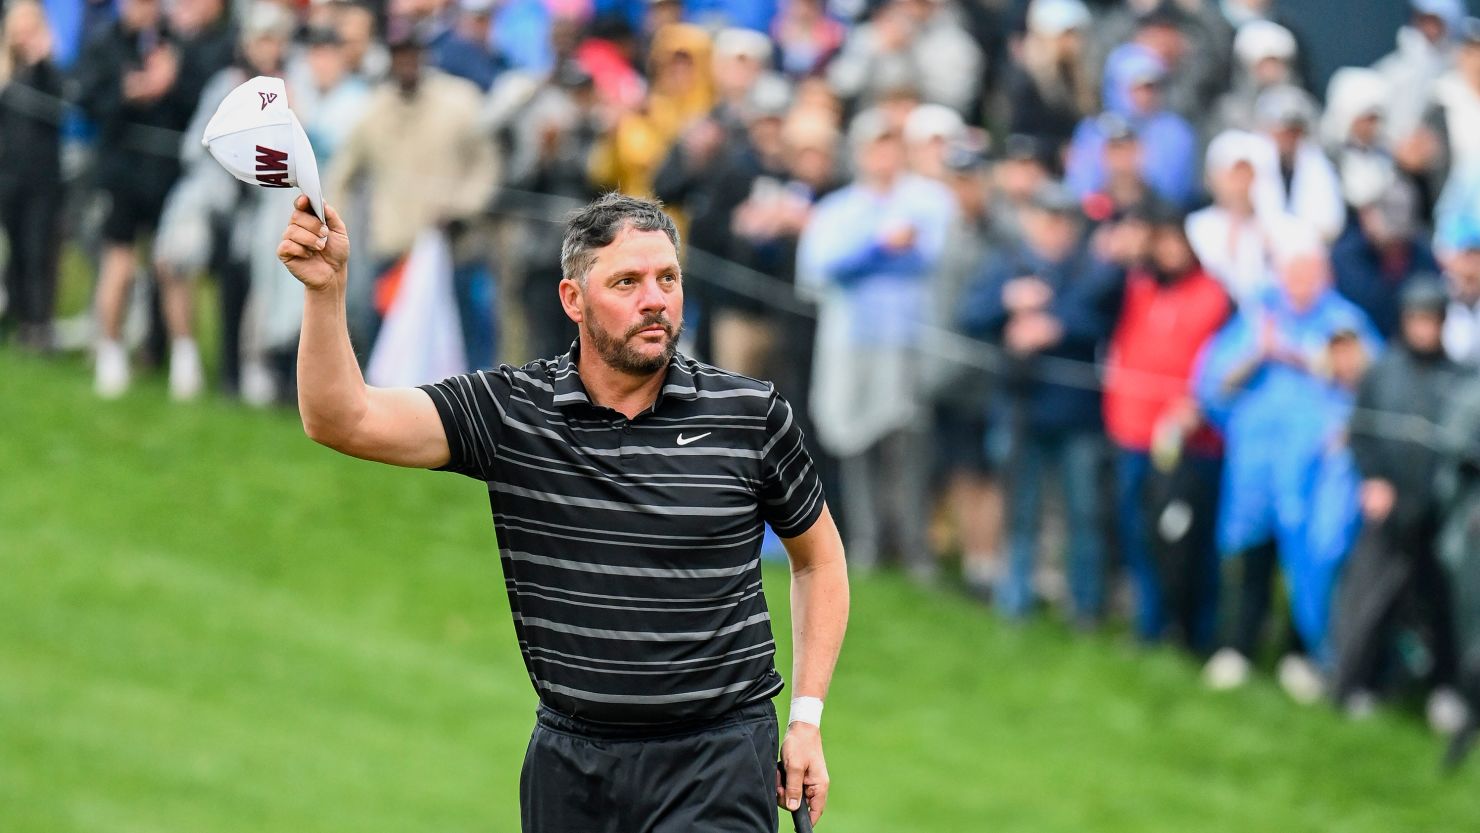 PGA Professional Michael Block tips his cap to fans on the 18th hole after carding a 70 during the third round of the 2023 PGA Championship at Oak Hill Country Club in Rochester, New York.